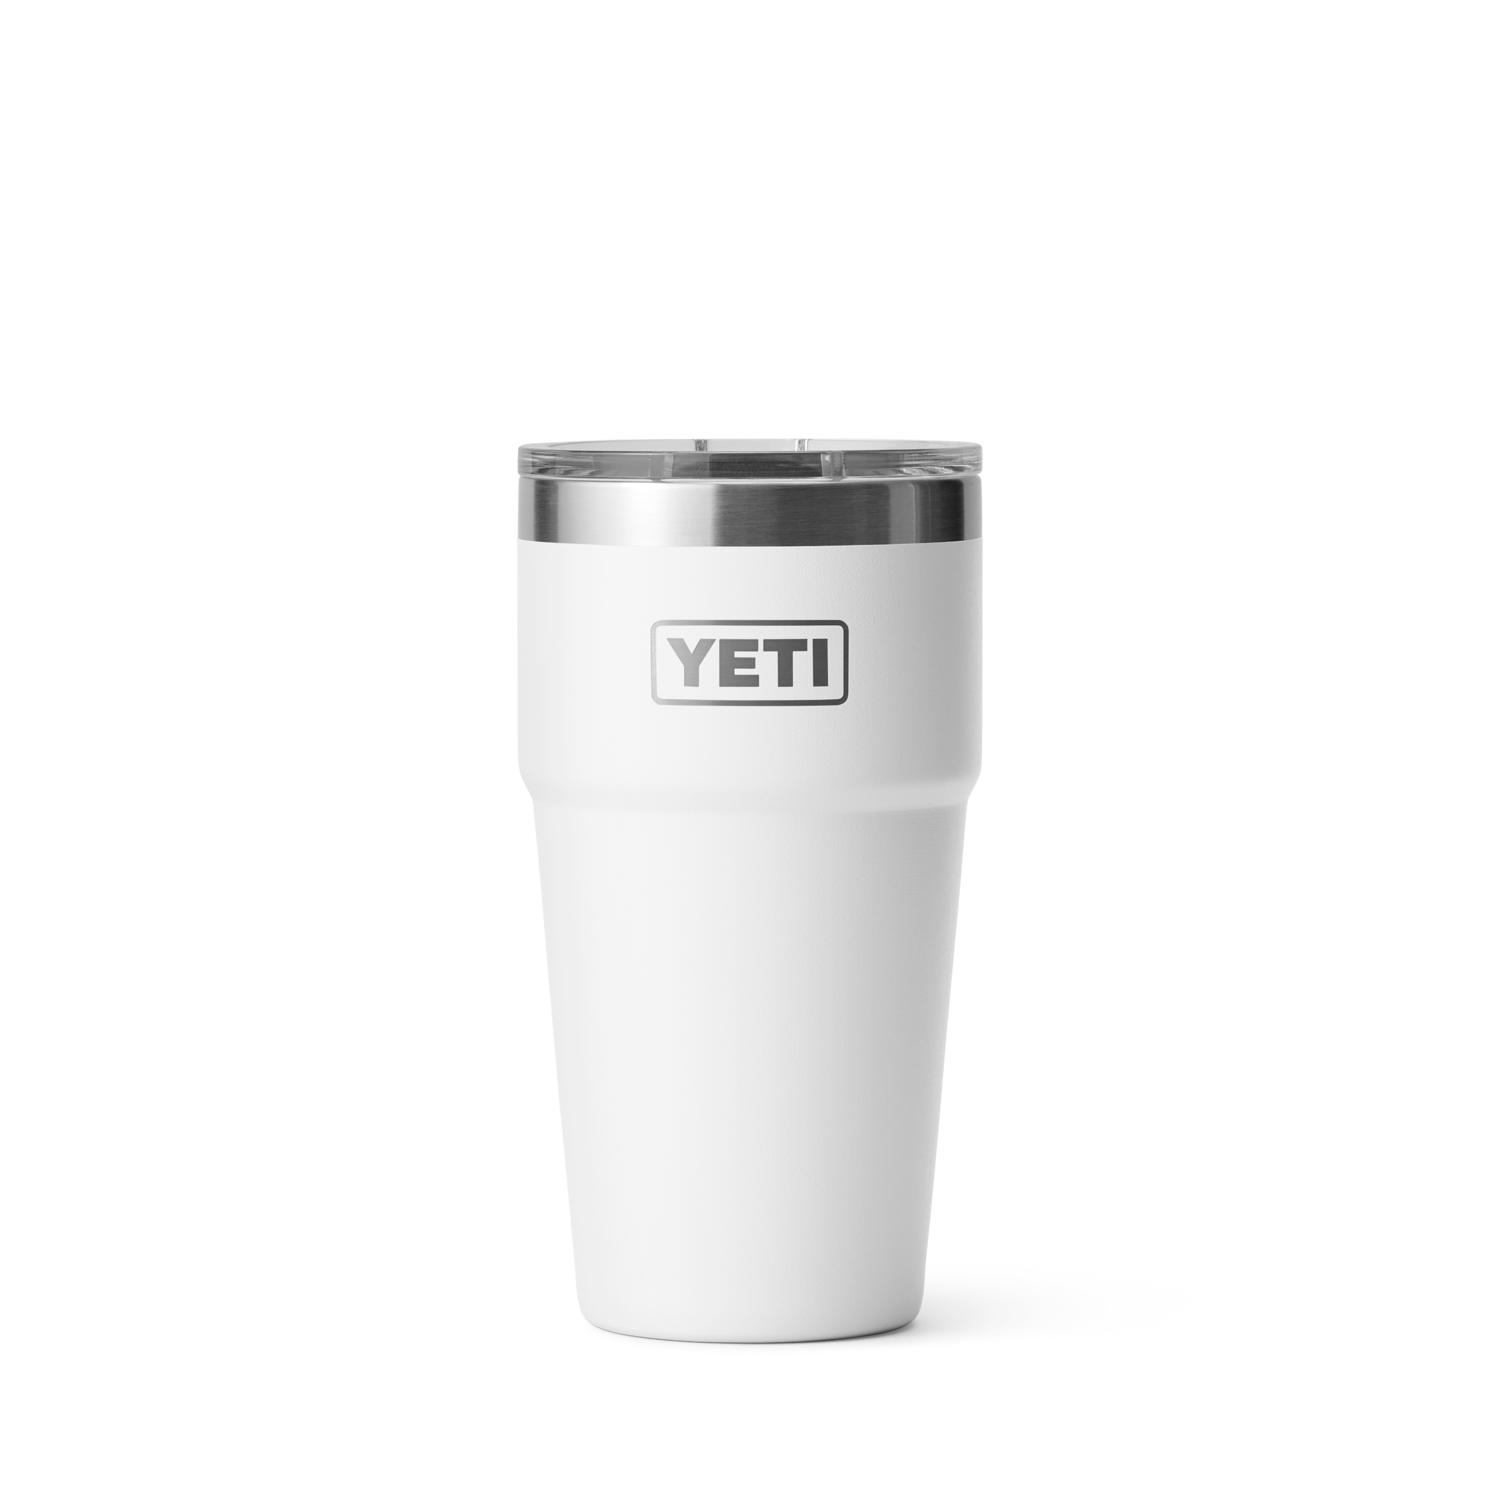 Yeti Rambler 16 Oz Colster Tall Can Cooler White